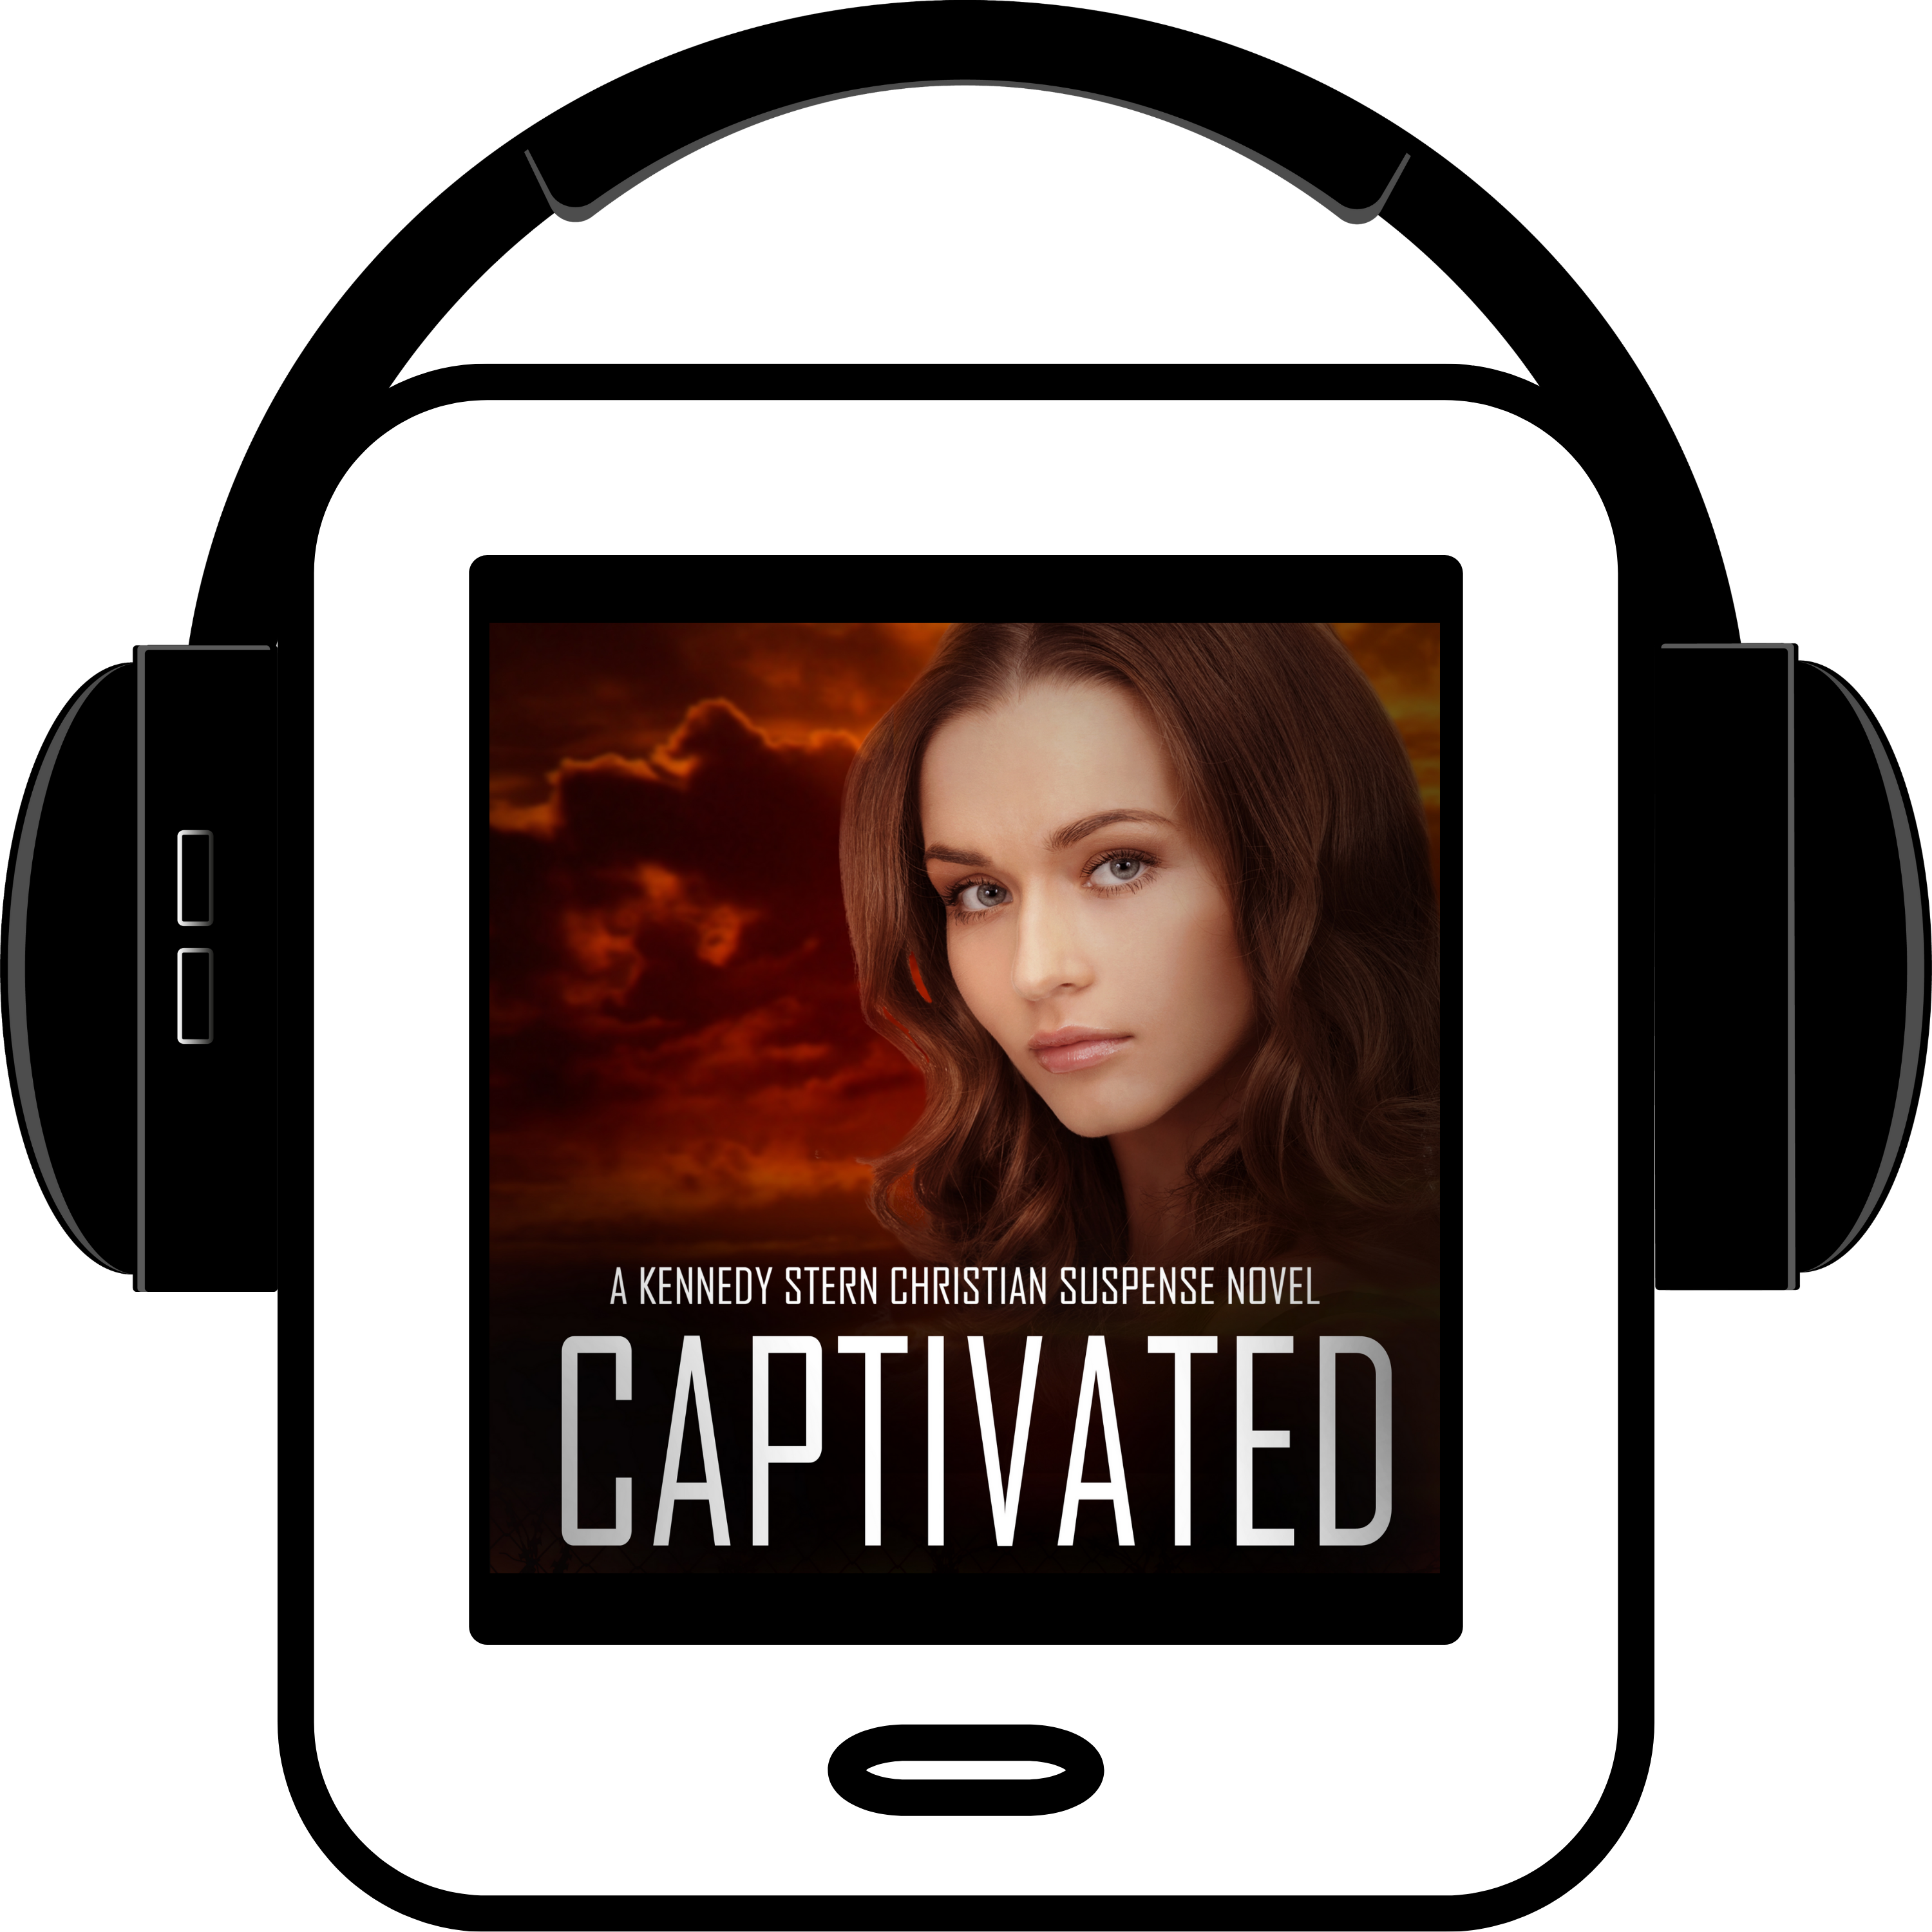 Captivated: Kennedy Stern #9 (audiobook)